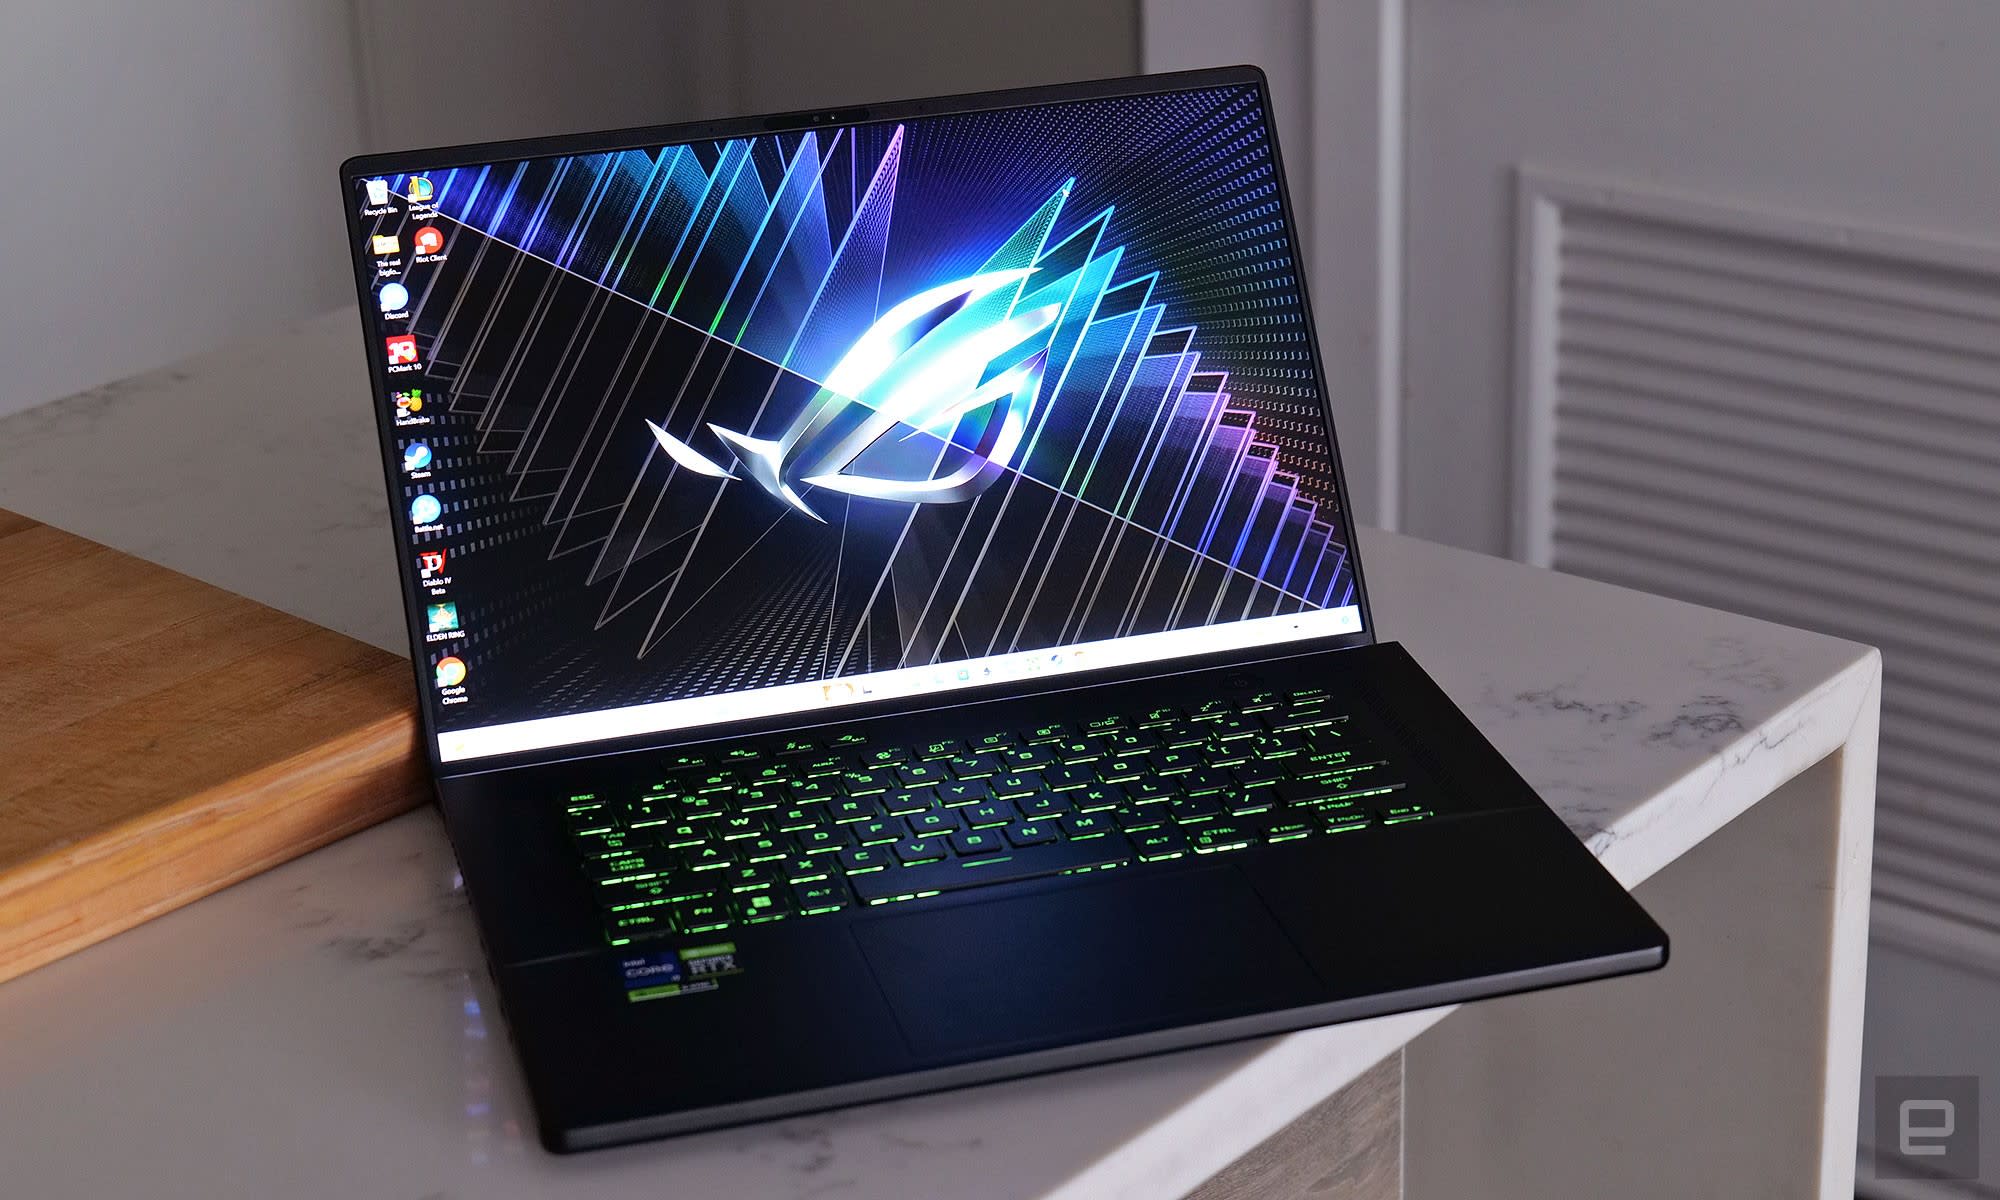 While its design hasn't changed much from last year's model, the new 2023 ASUS ROG Zephyrus M16 is packing improved performance thanks to an updated range of CPUs and GPUs along with a brilliant new Mini LED display. 